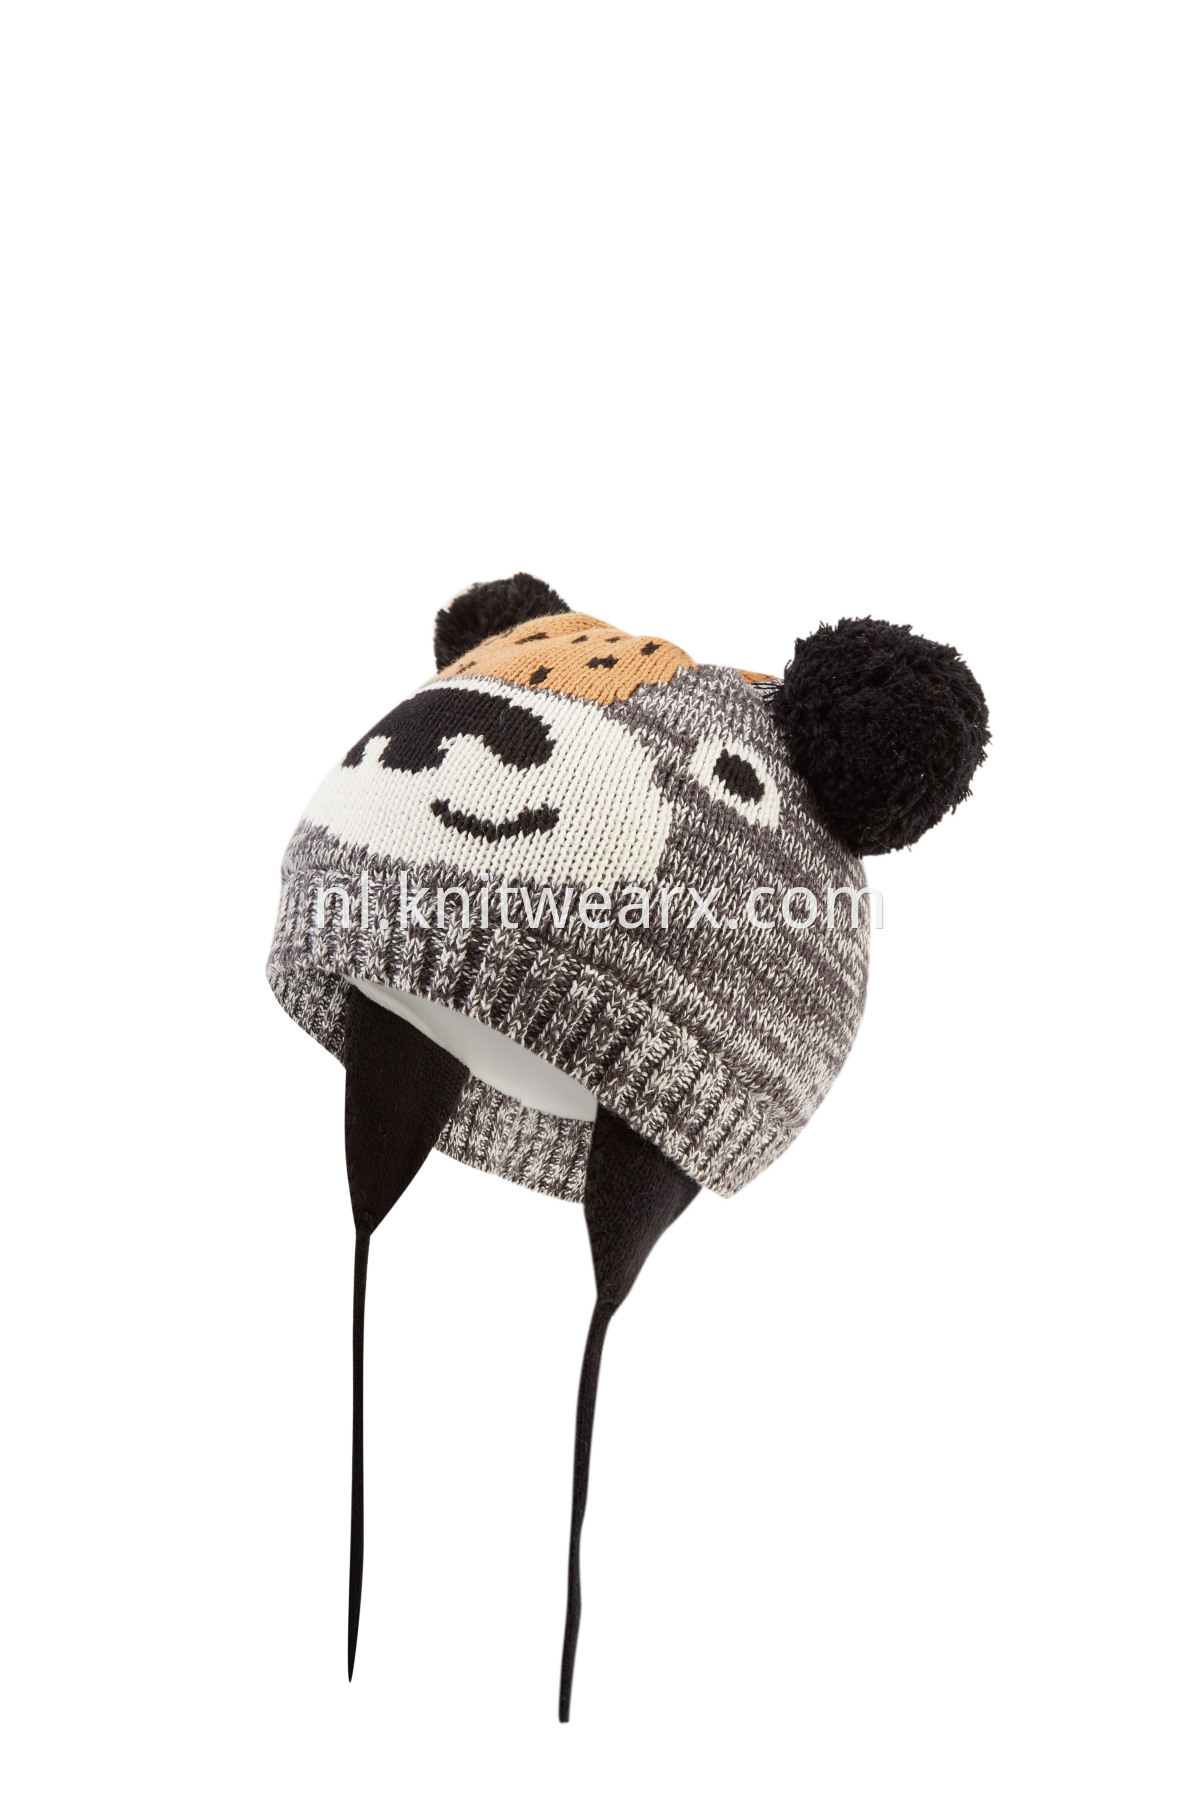 Boy's Winter Tiger Knitted Beanie Cap with Warm Ear Flap